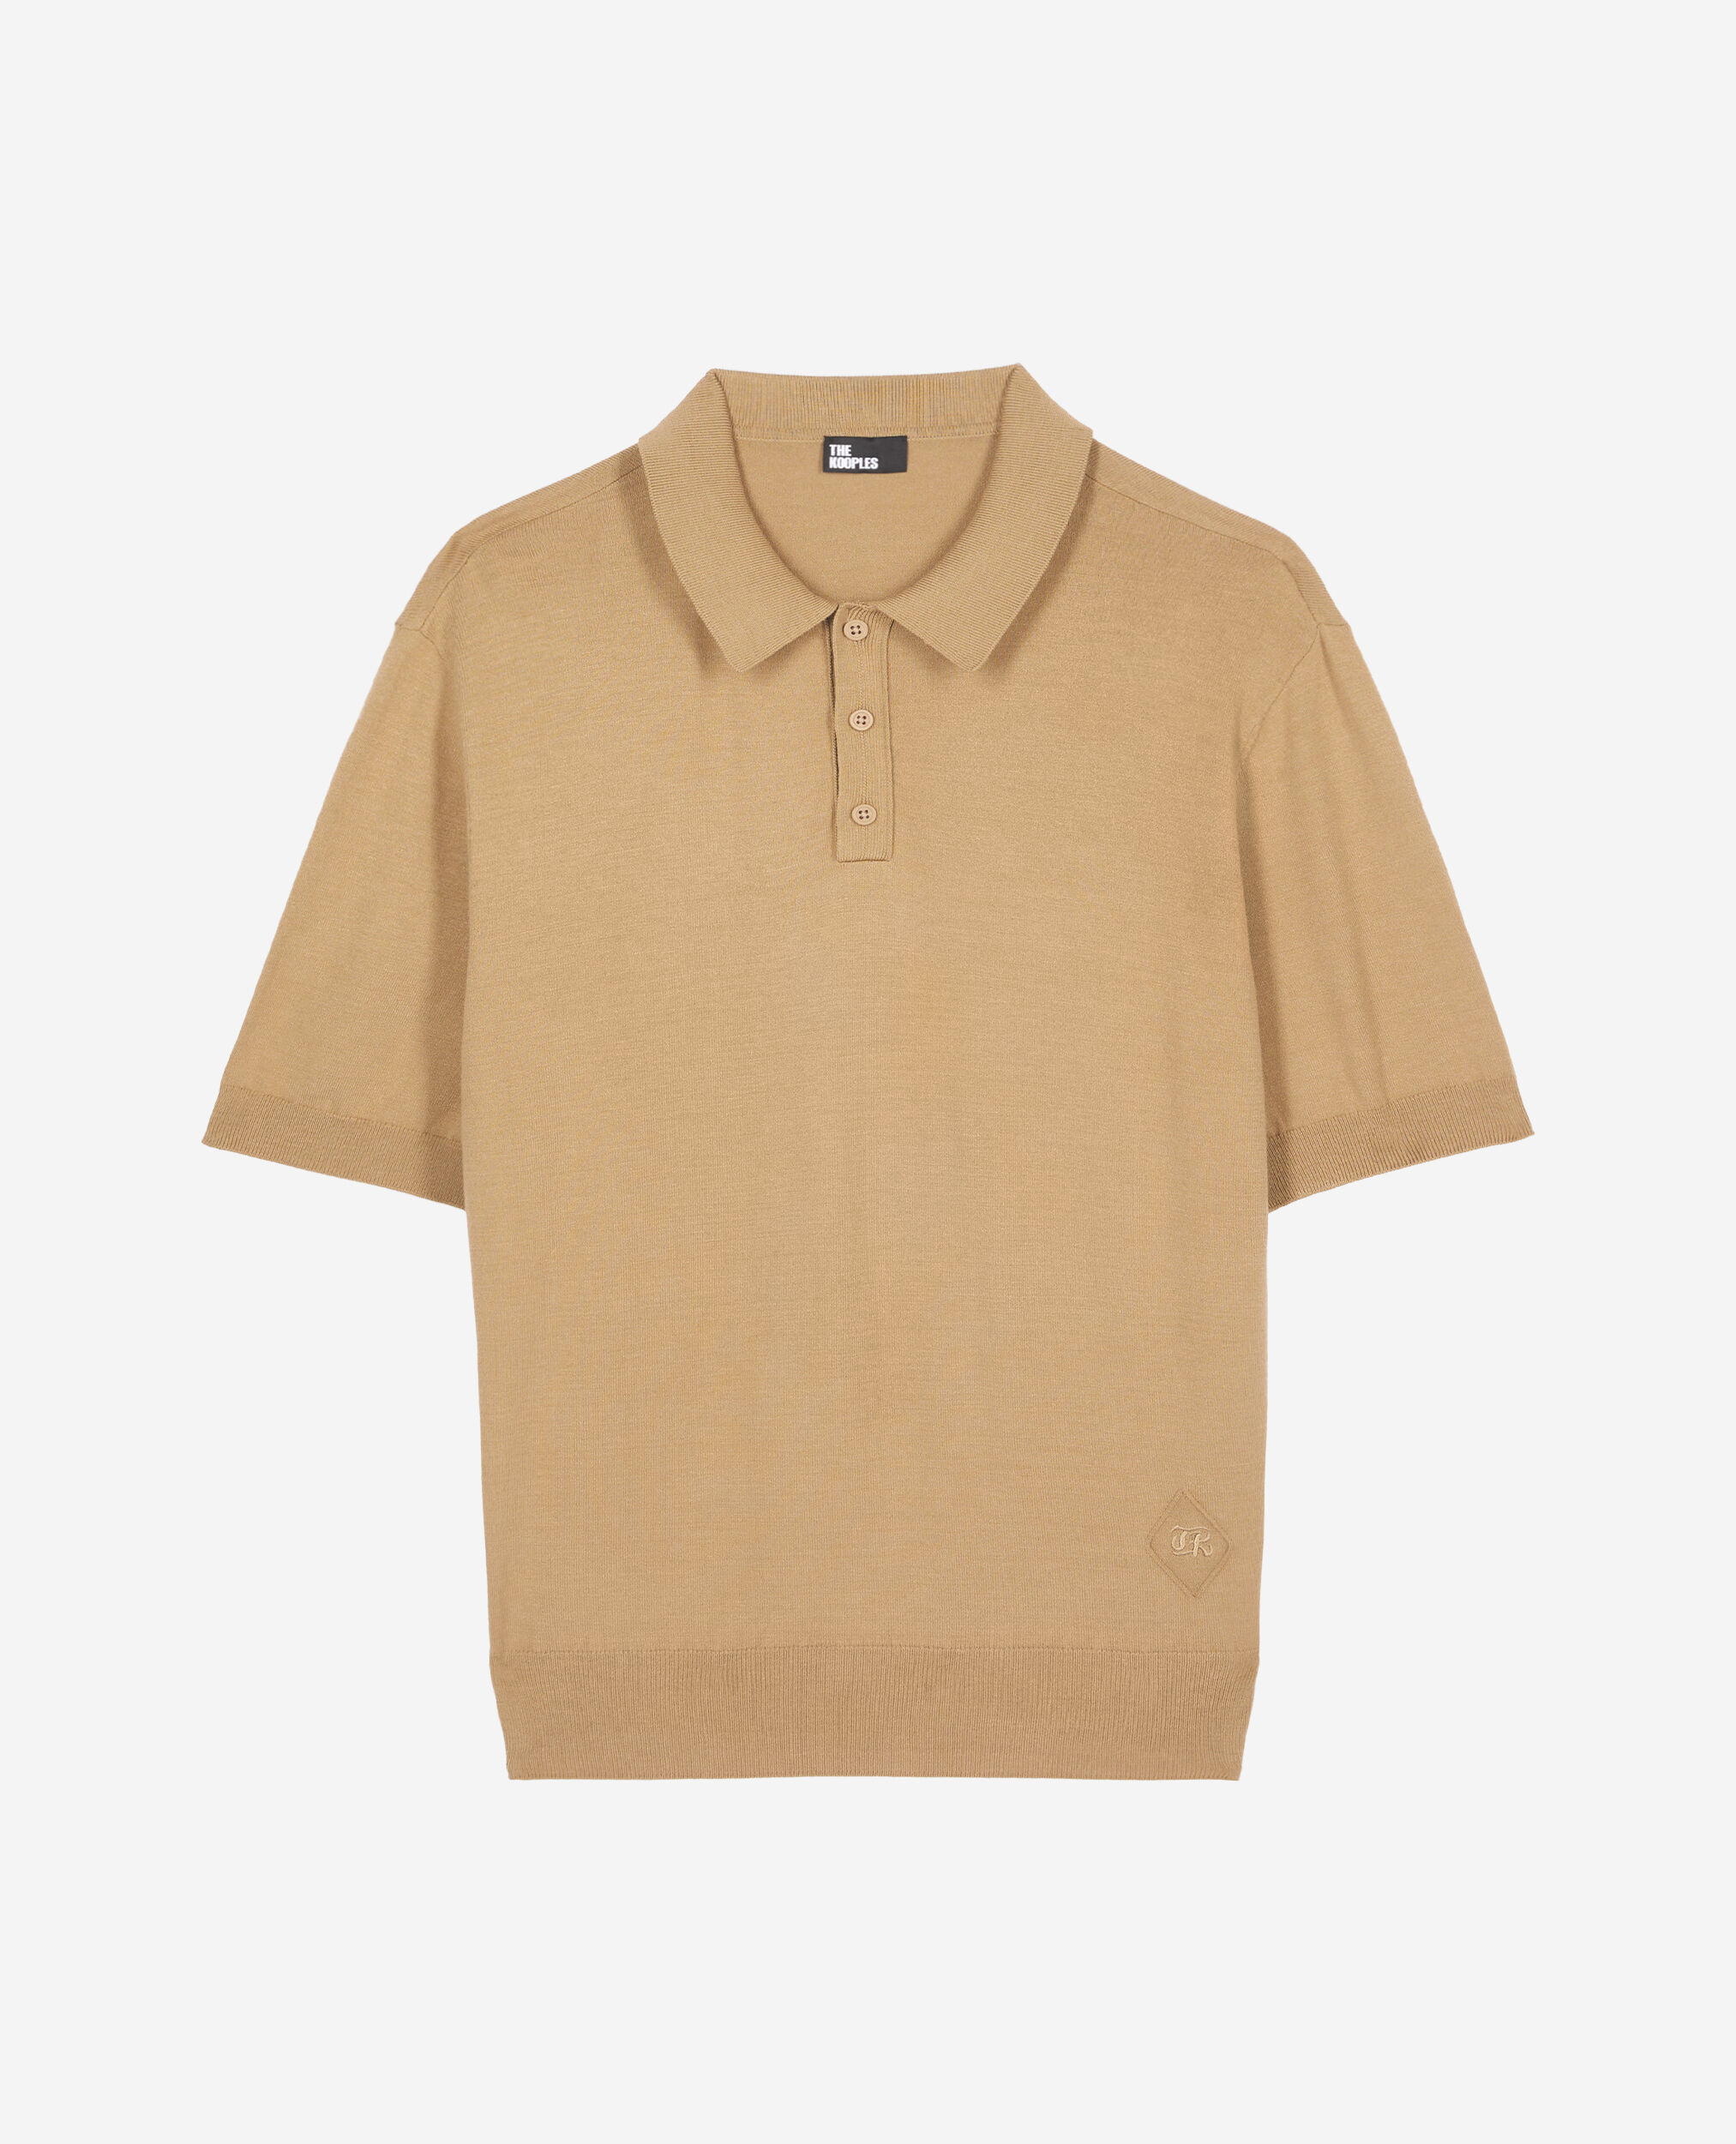 Brown knitted polo t-shirt, BEIGE, hi-res image number null